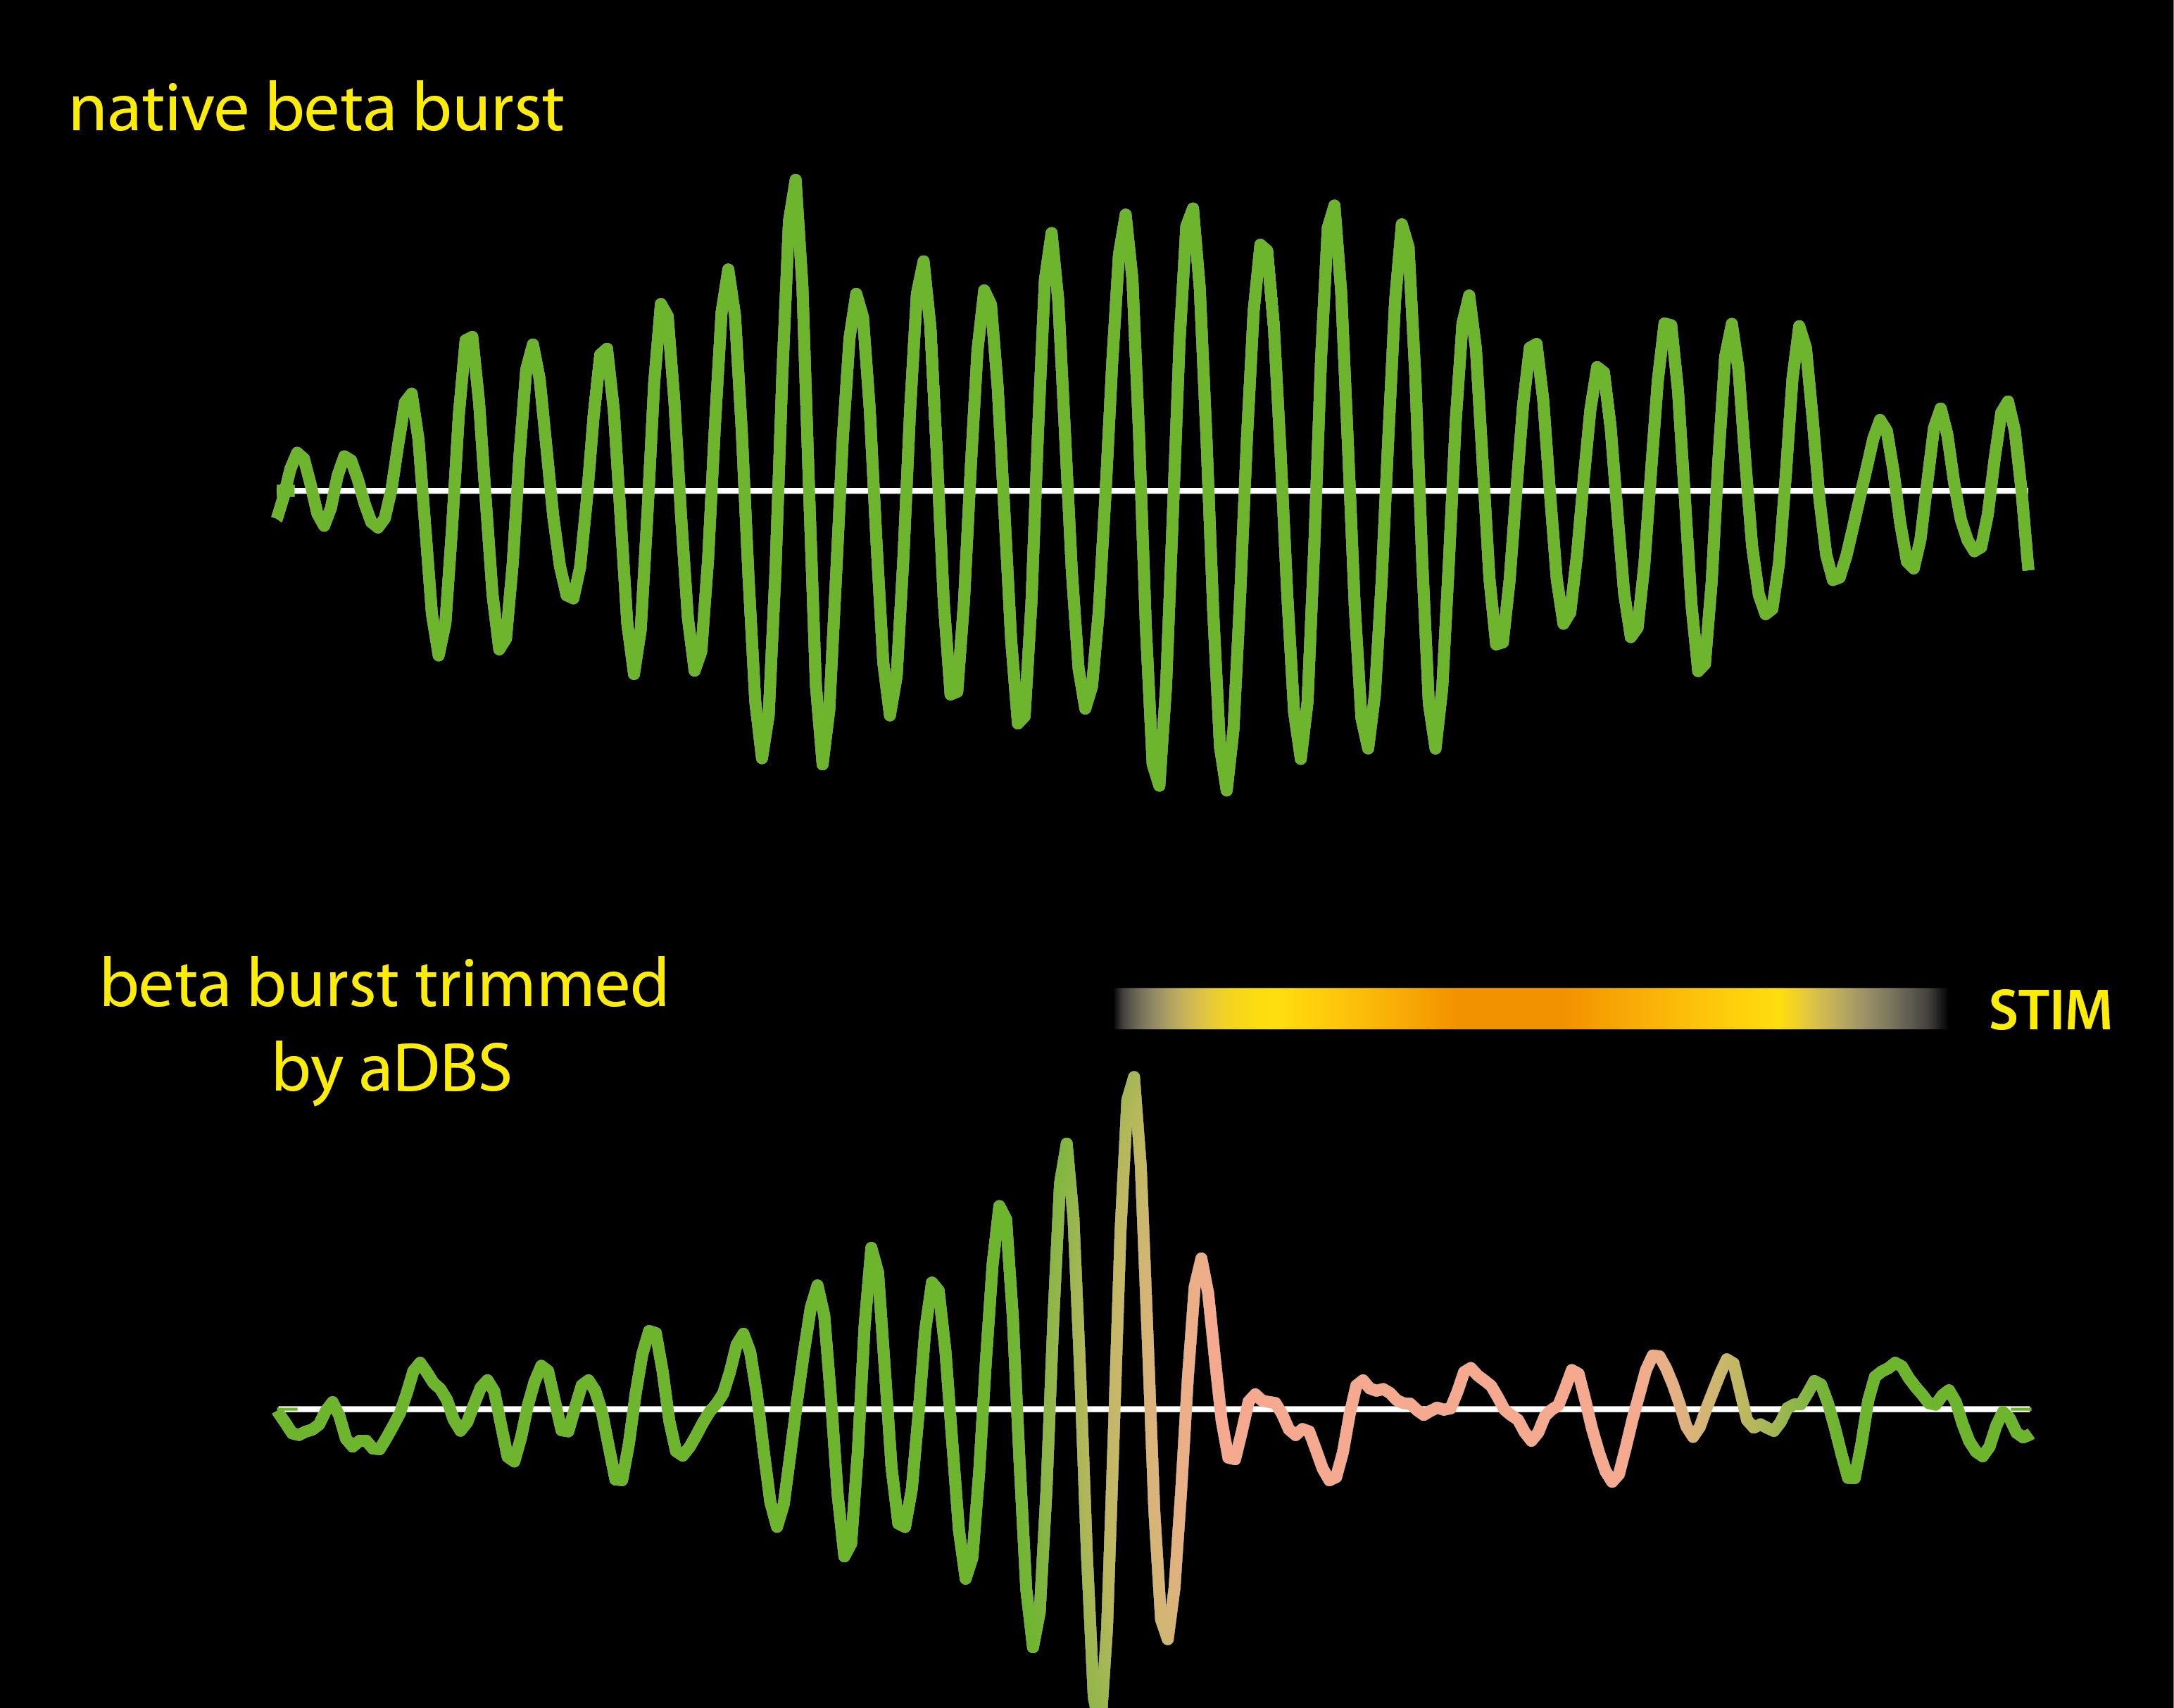 One important effect of adaptive Deep Brain Stimulation (aDBS) is to prematurely terminate long bursts of beta oscillations in the brain in Parkinson’s disease.